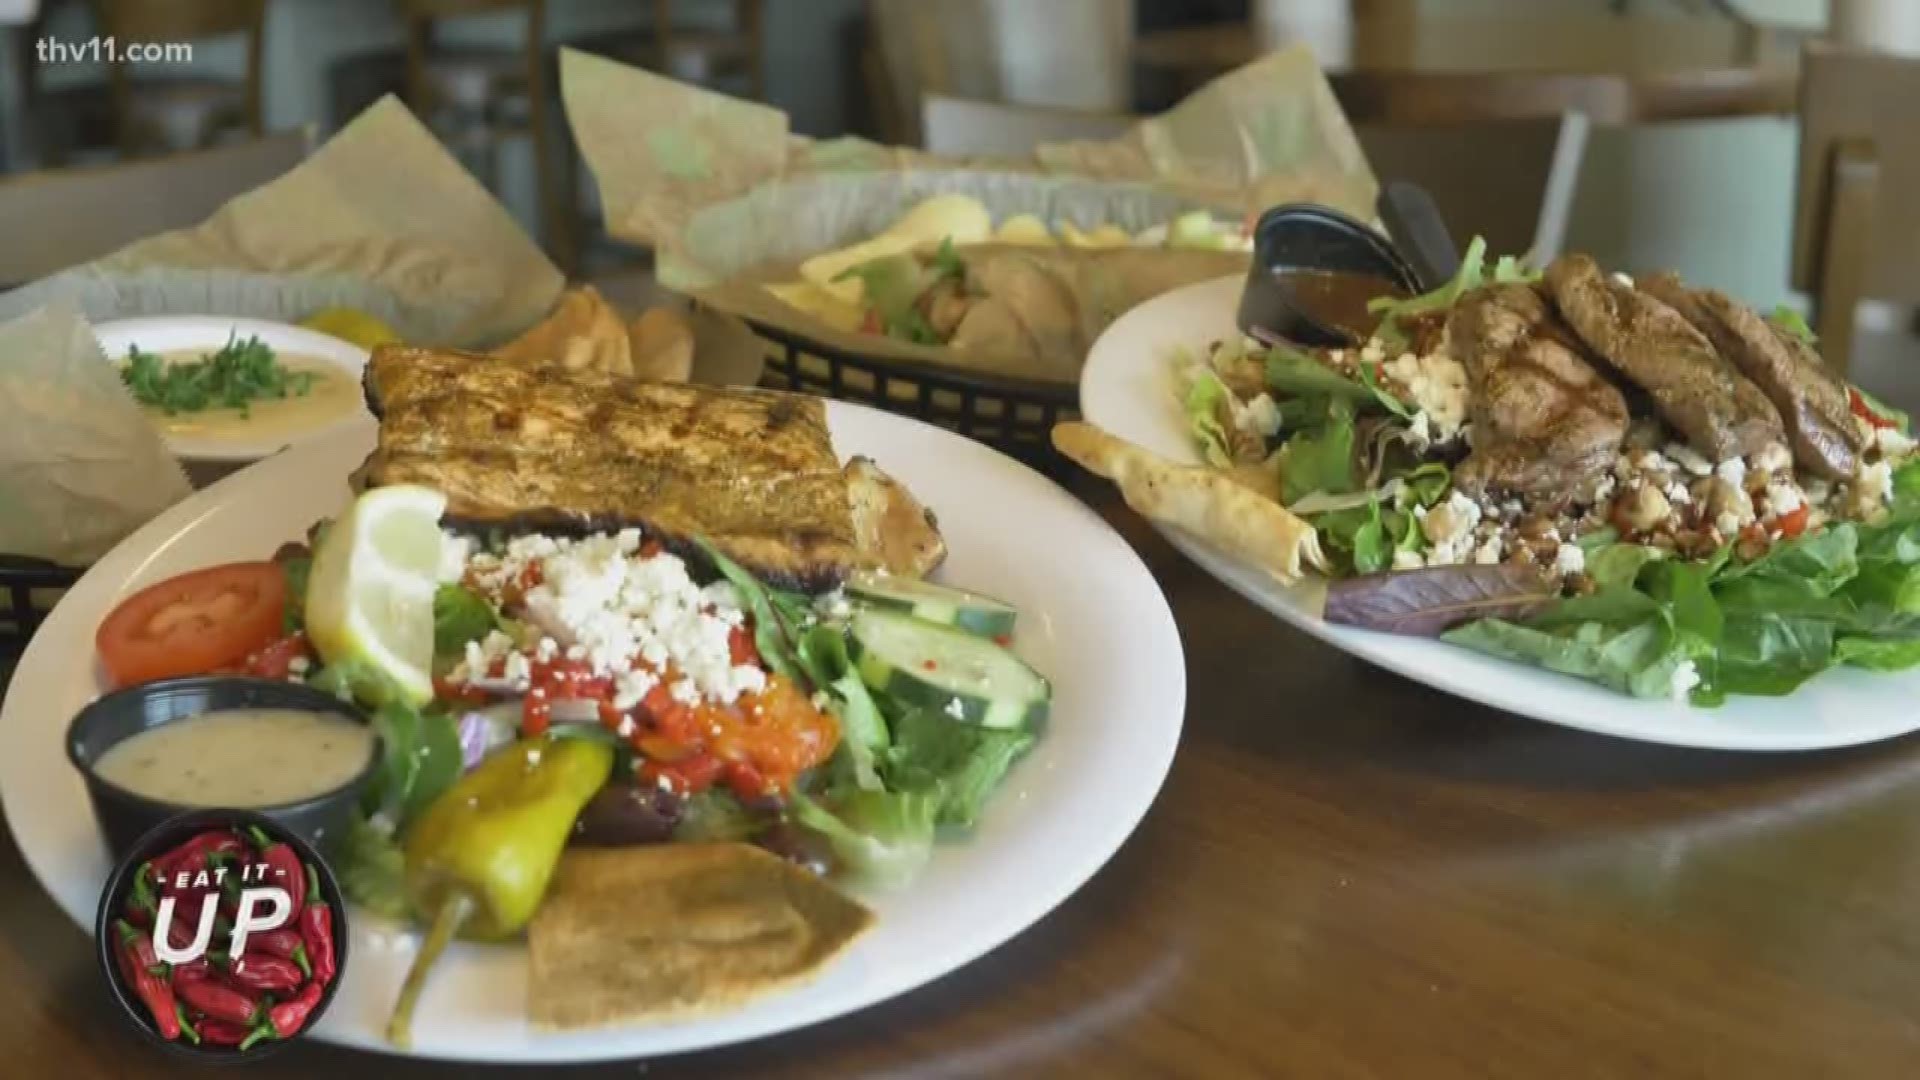 Taziki's is great Mediterranean food made right here in central Arkansas.